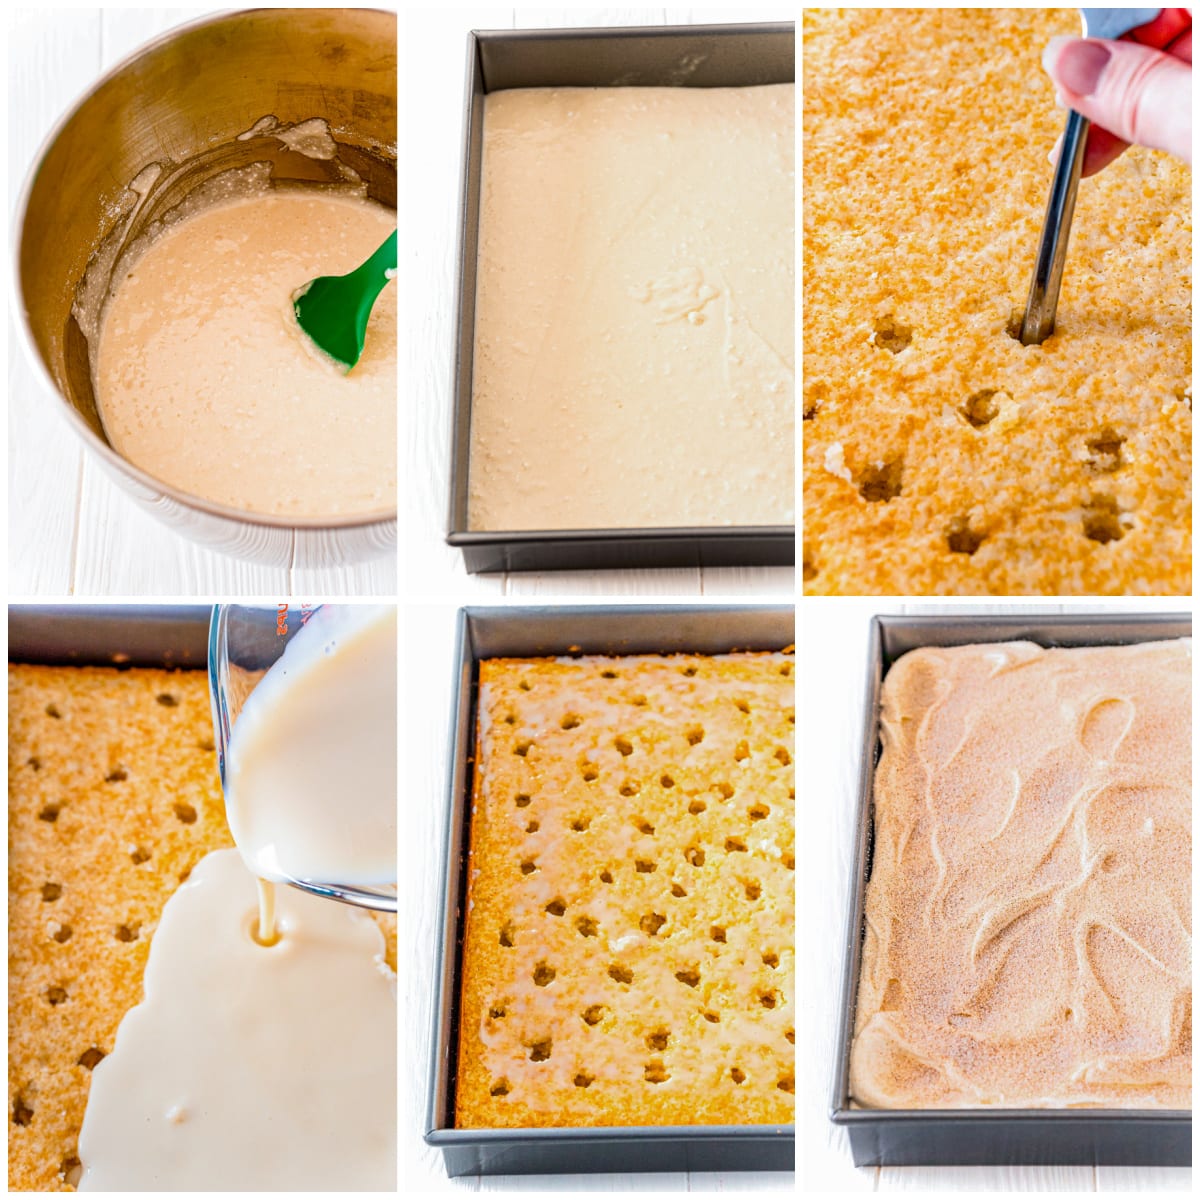 Step by step photos on how to make a RumChata Poke Cake.